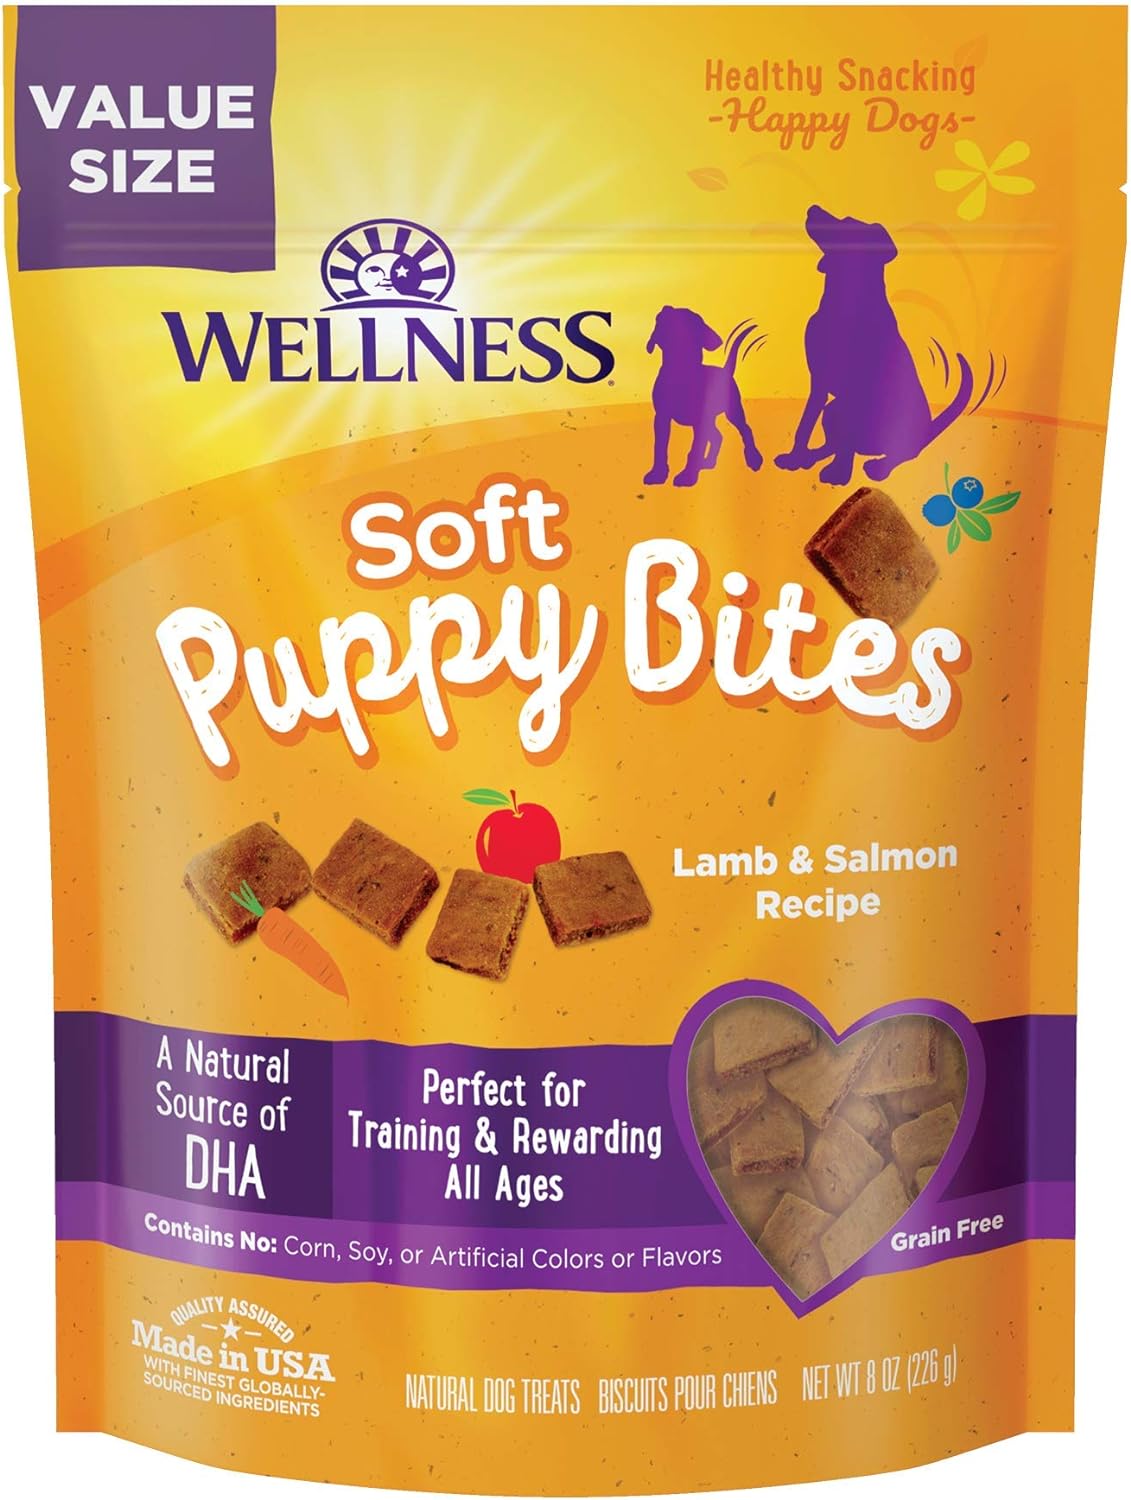 Wellness Soft Puppy Bites Healthy Grain-Free Treats for Training, Dog Treats with Real Meat and DHA, No Artificial Flavors (Lamb & Salmon, 8-Ounce Bag)